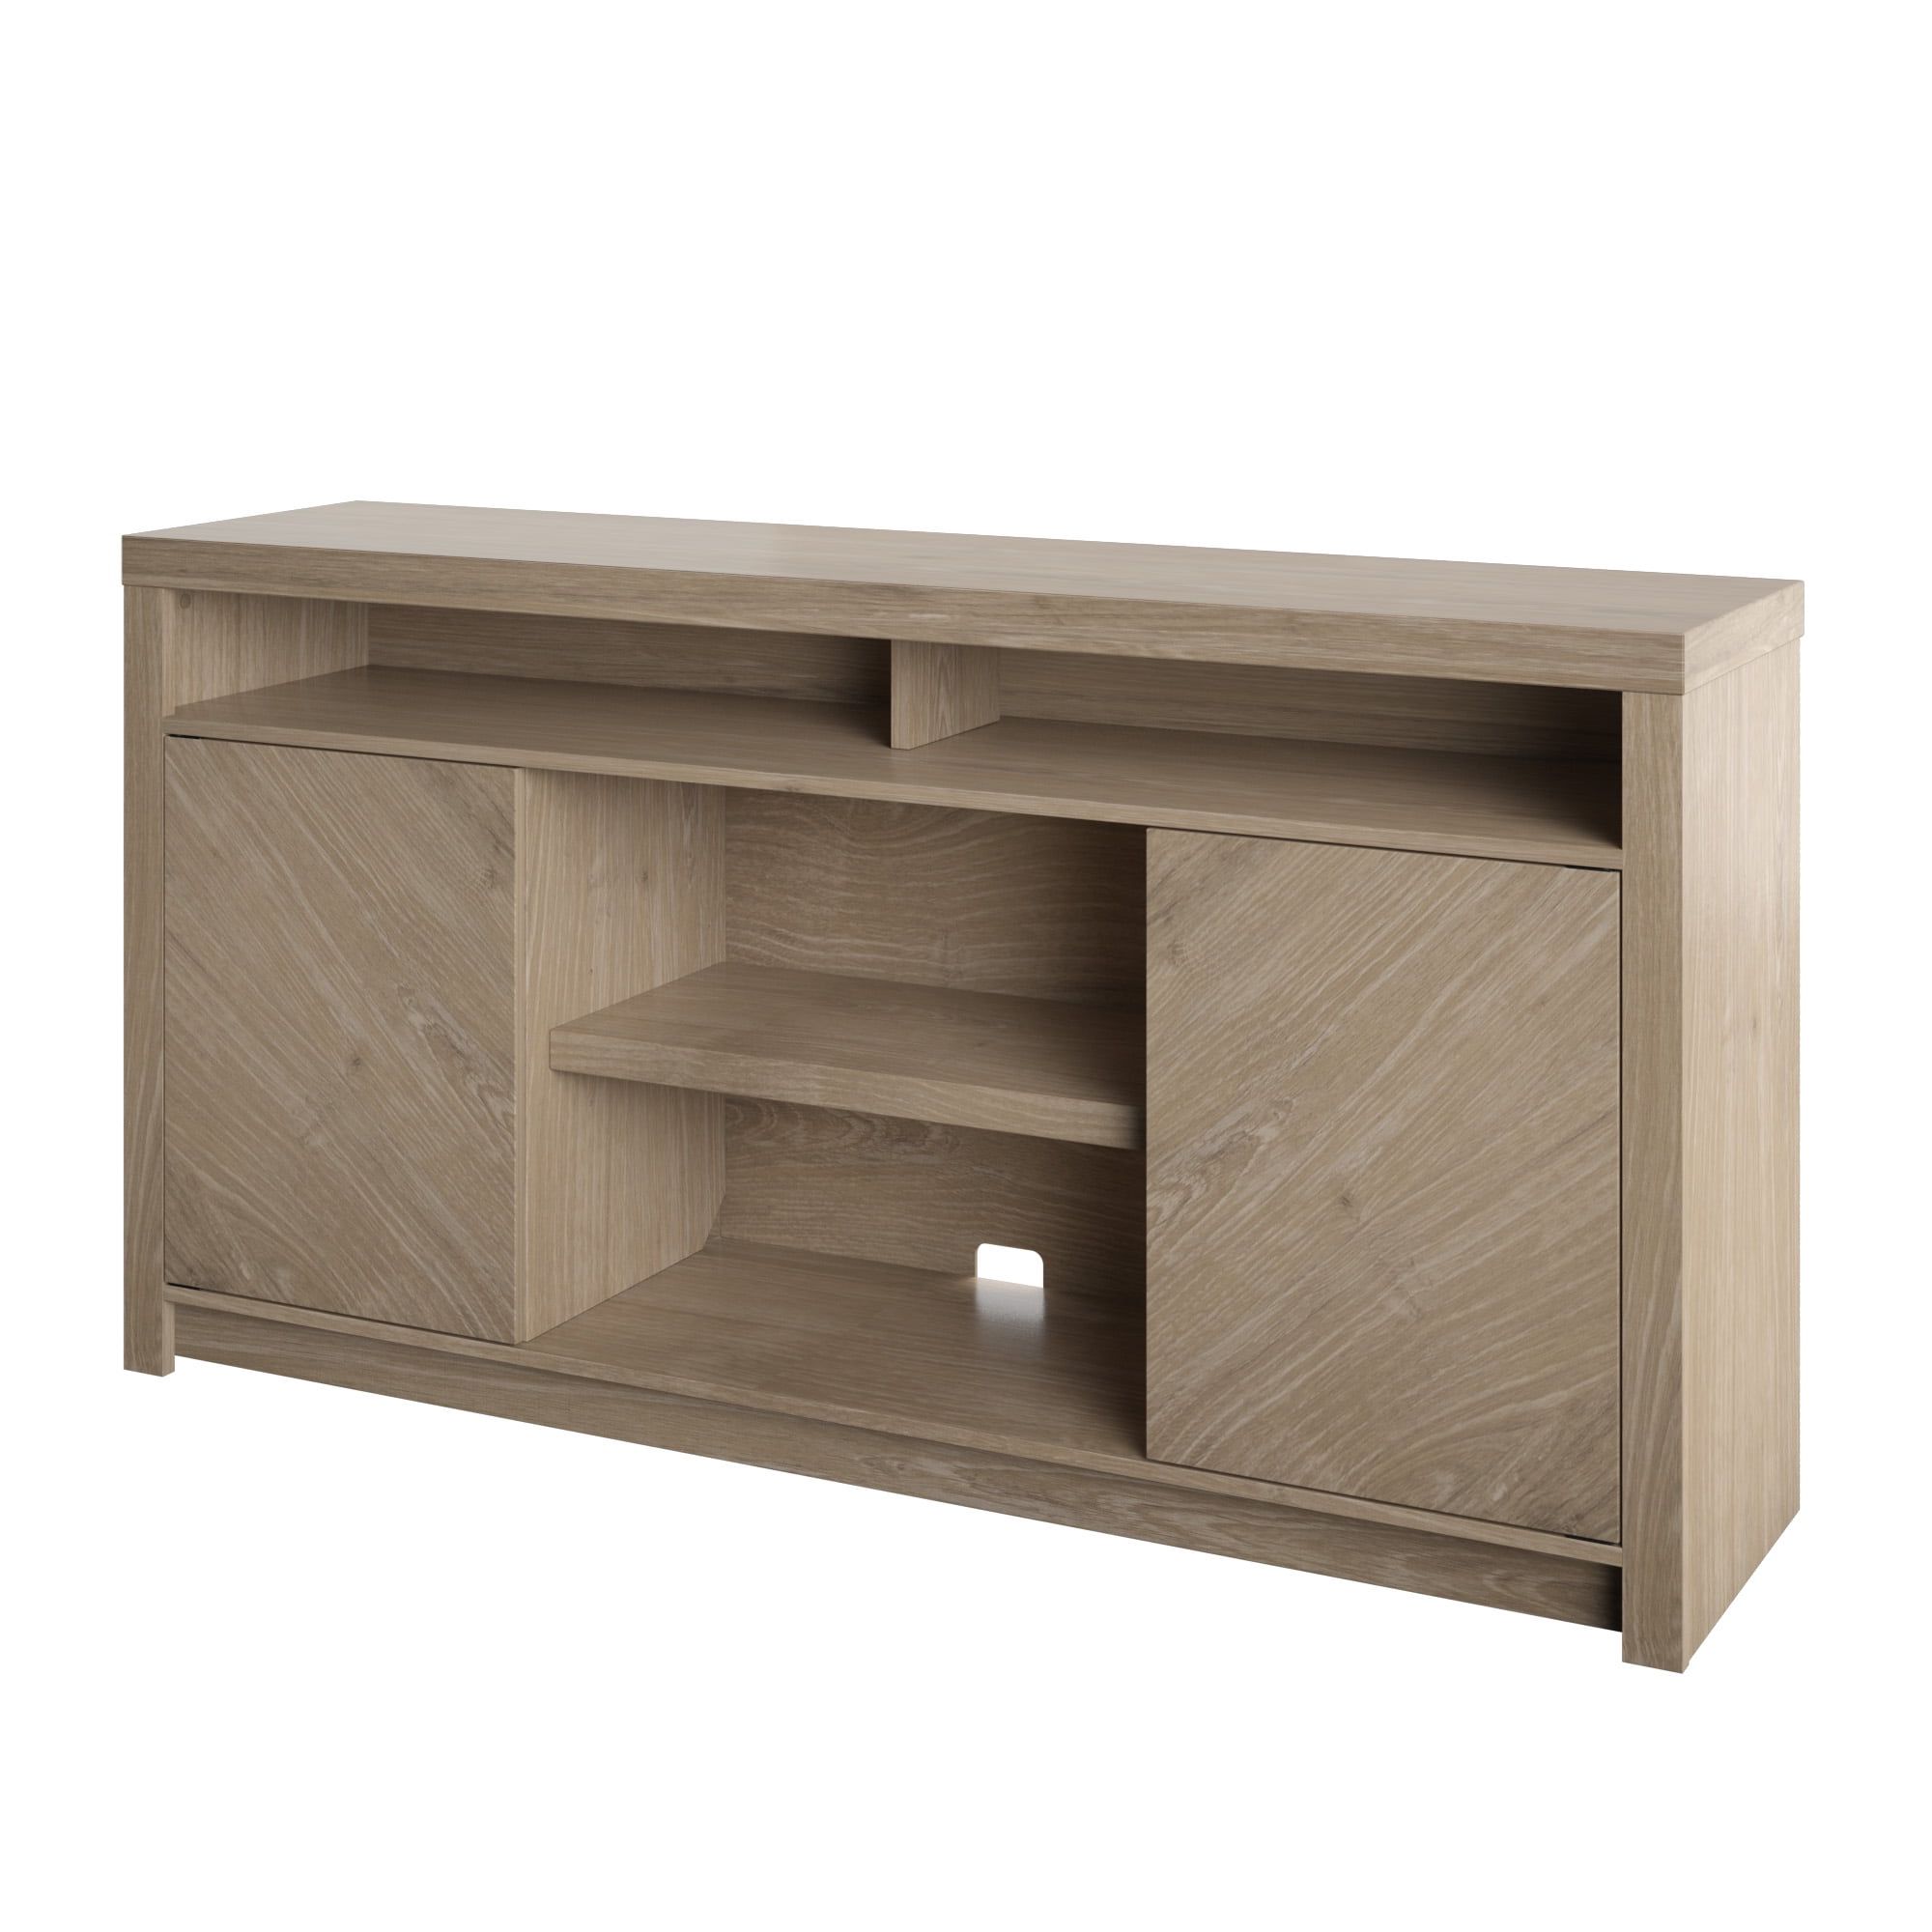 Contemporary Tv Stand For Tvs Up To 70" With Open Center Shelves, Natural  Oak – Walmart For Cafe Tv Stands With Storage (View 17 of 20)